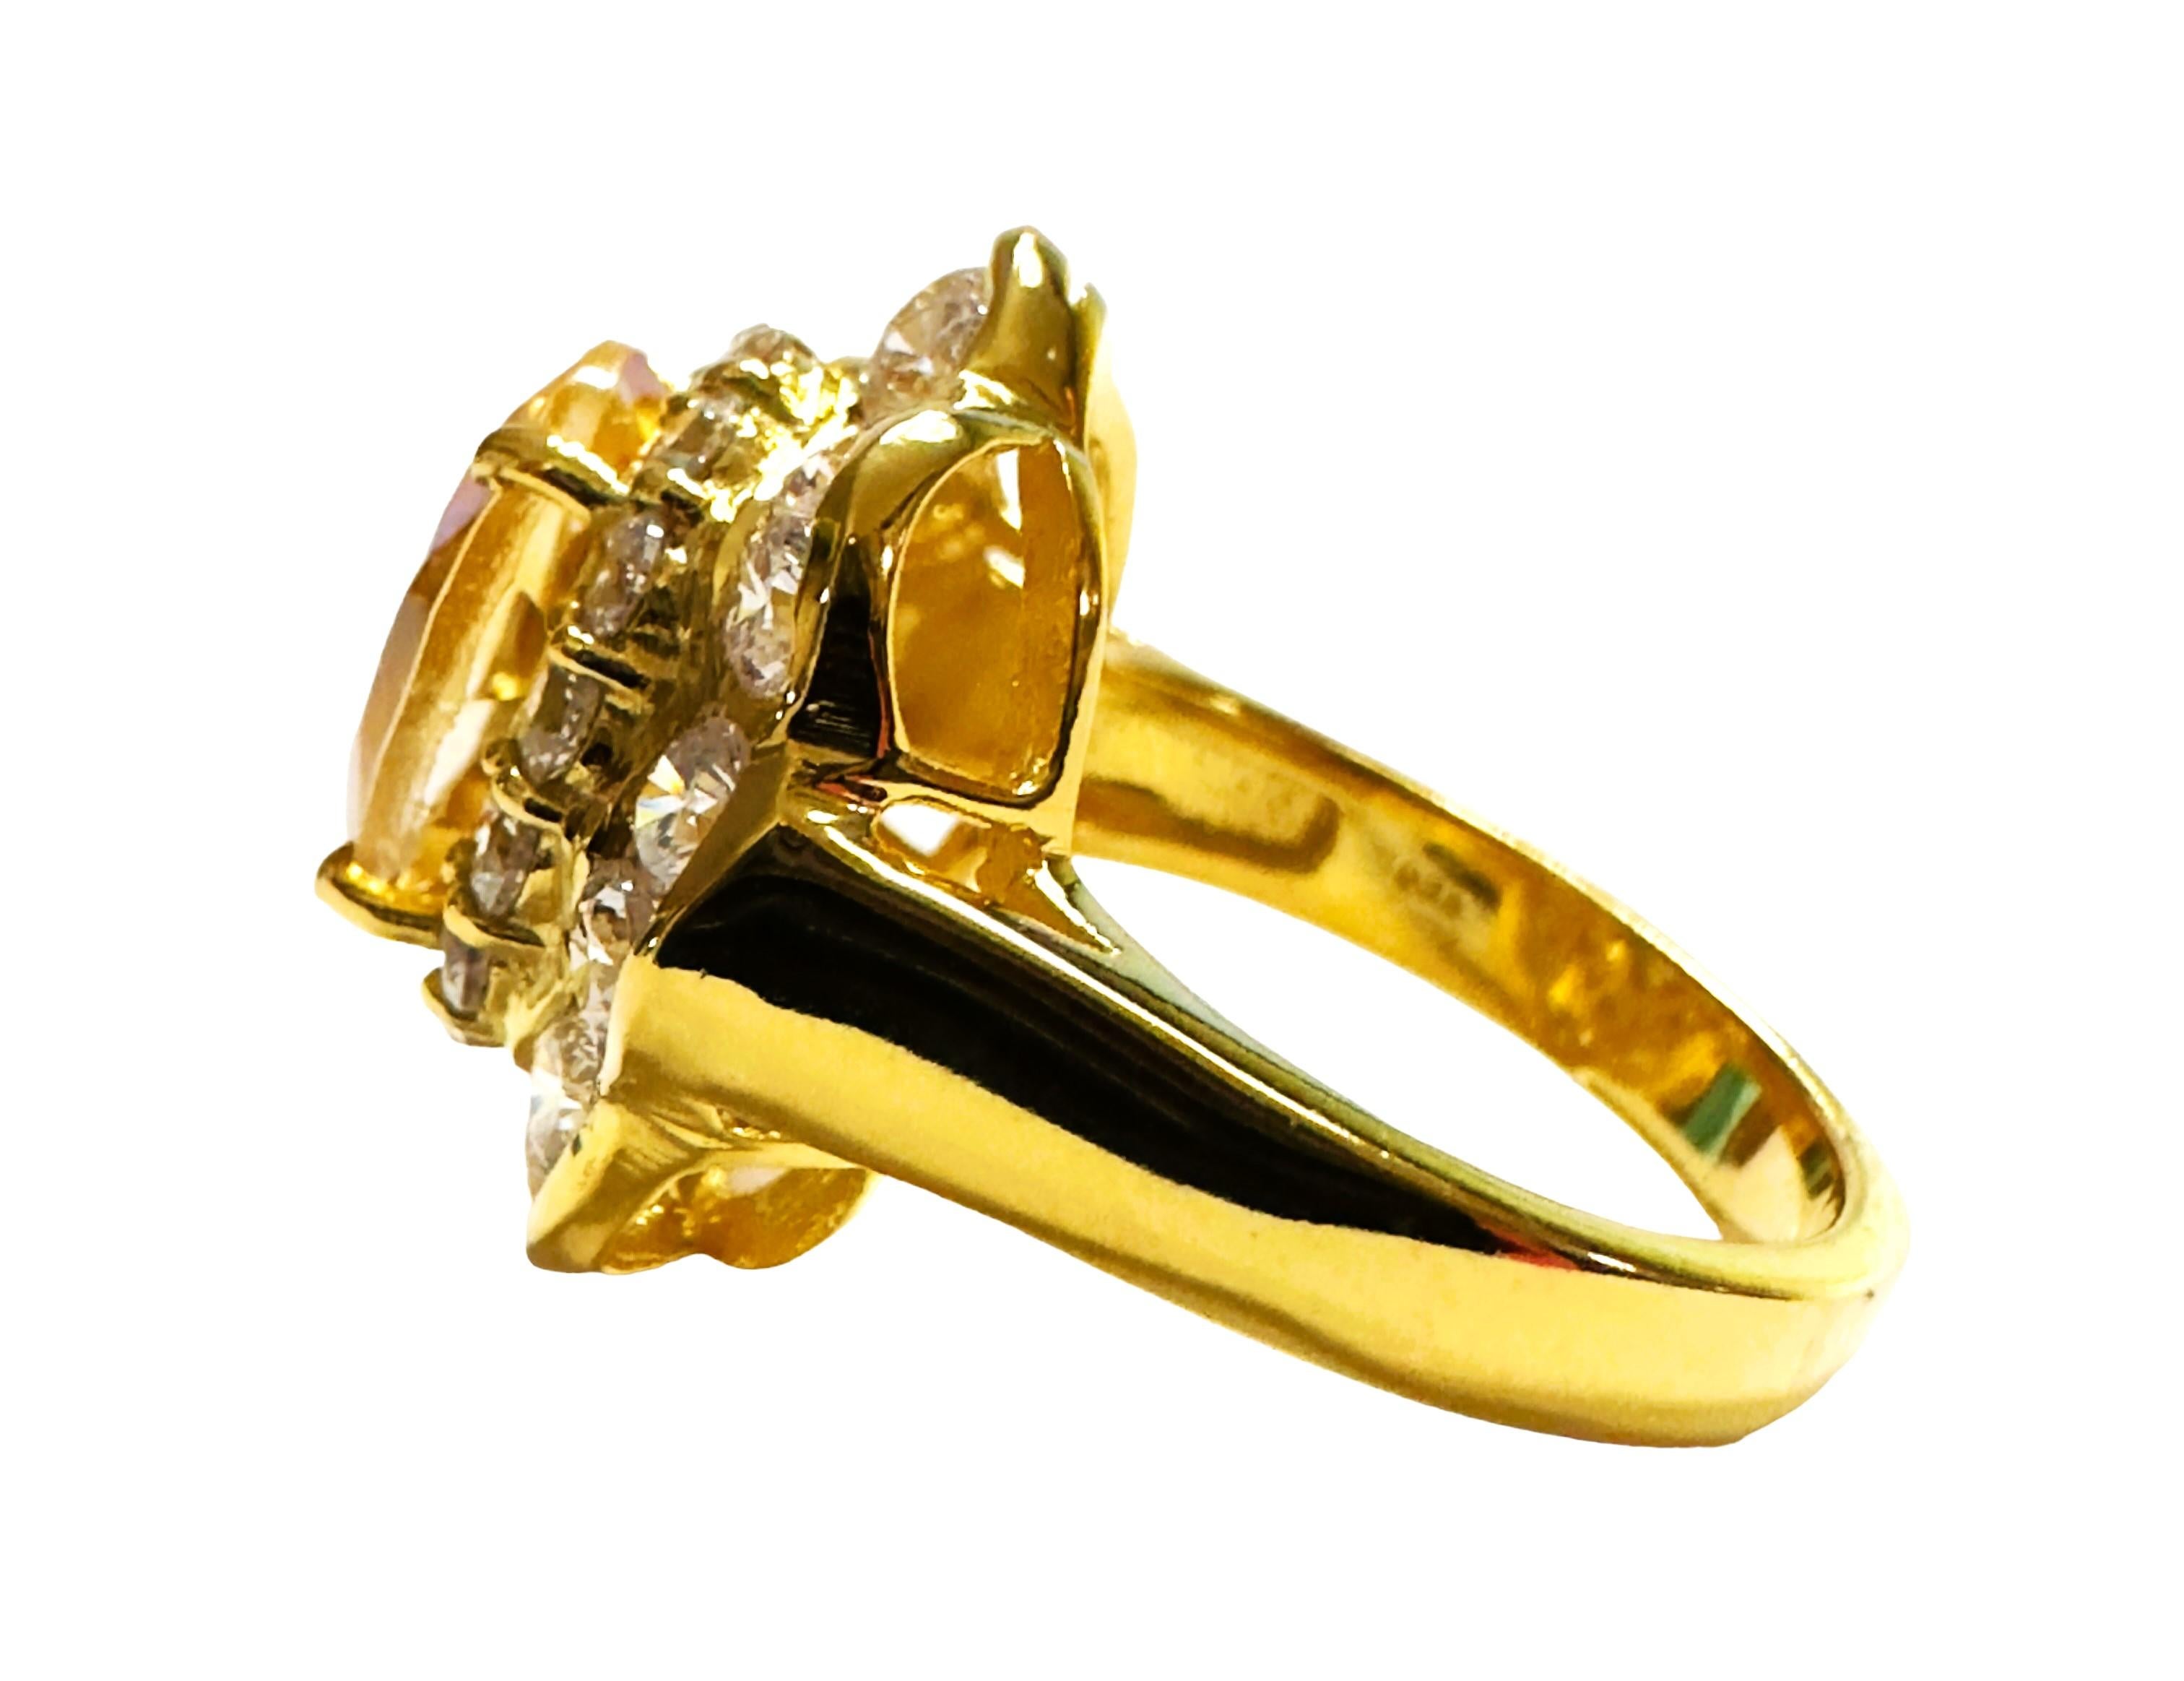 What a beautiful ring!  The ring is a size 6.25.   It was mined in Brazil and is just exquisite.  A very high quality stone.  The 